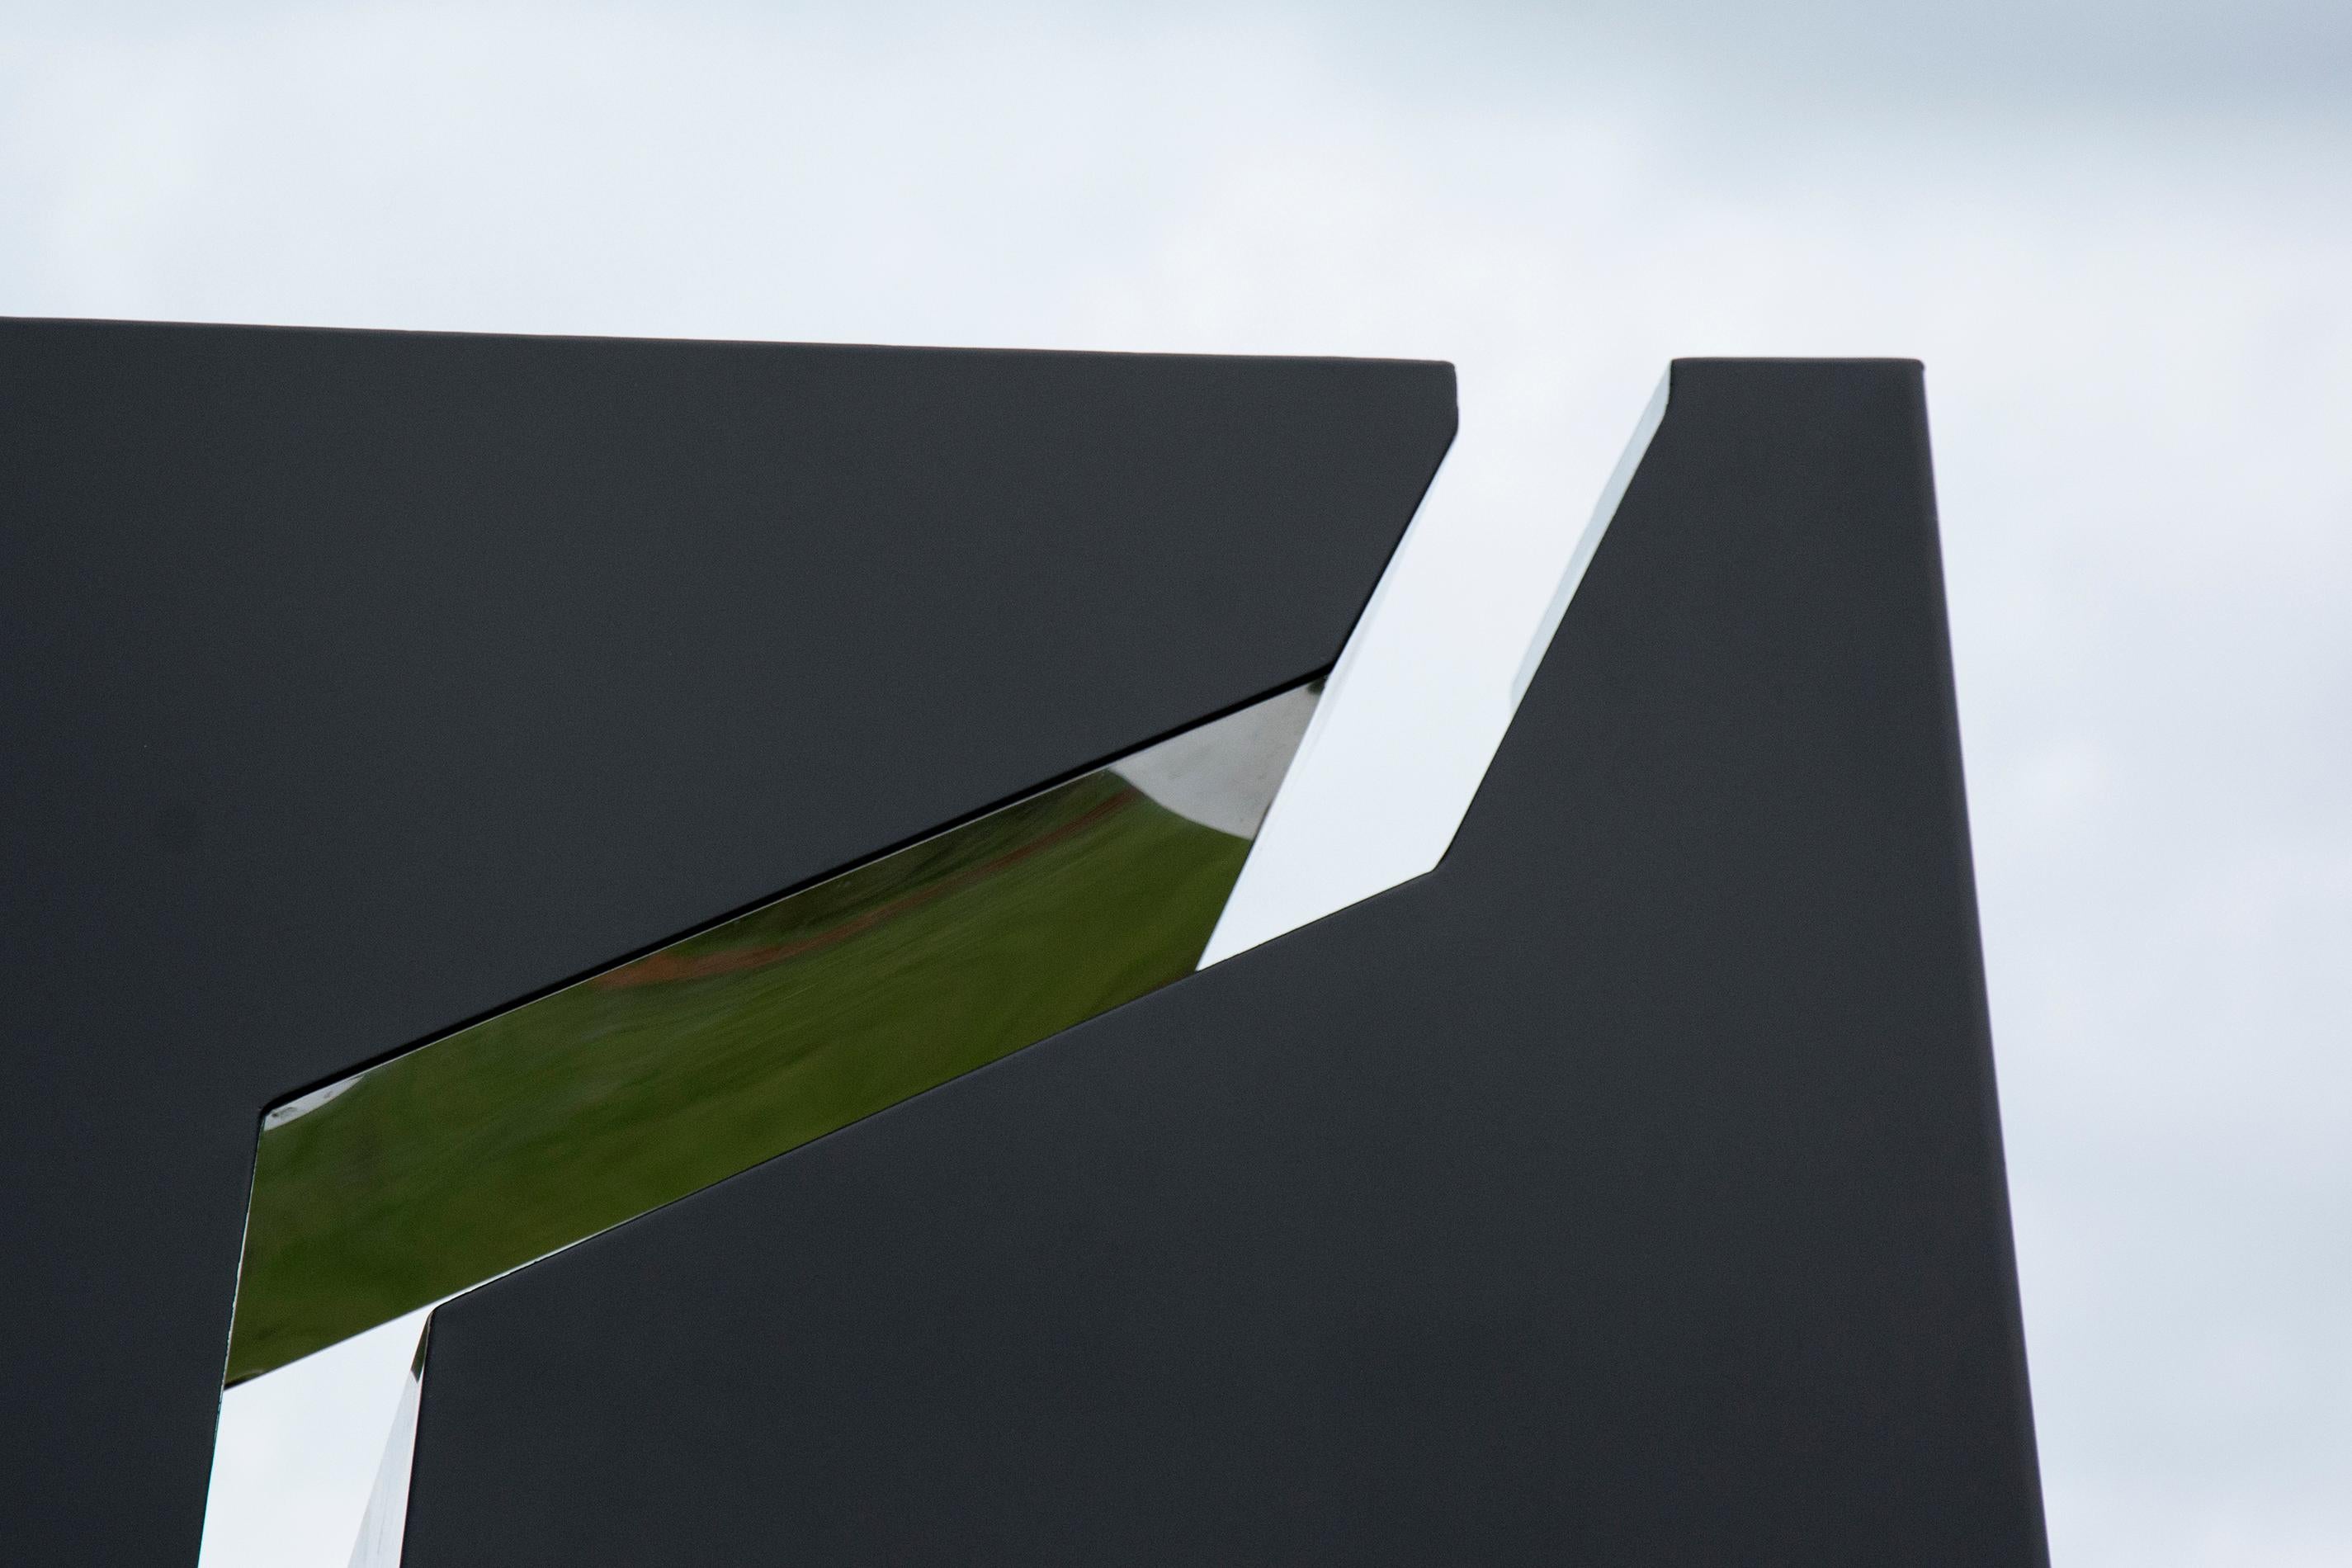 Aquagraphie Variation 2 - modern, geometric abstract, outdoor steel sculpture - Contemporary Art by Philippe Pallafray